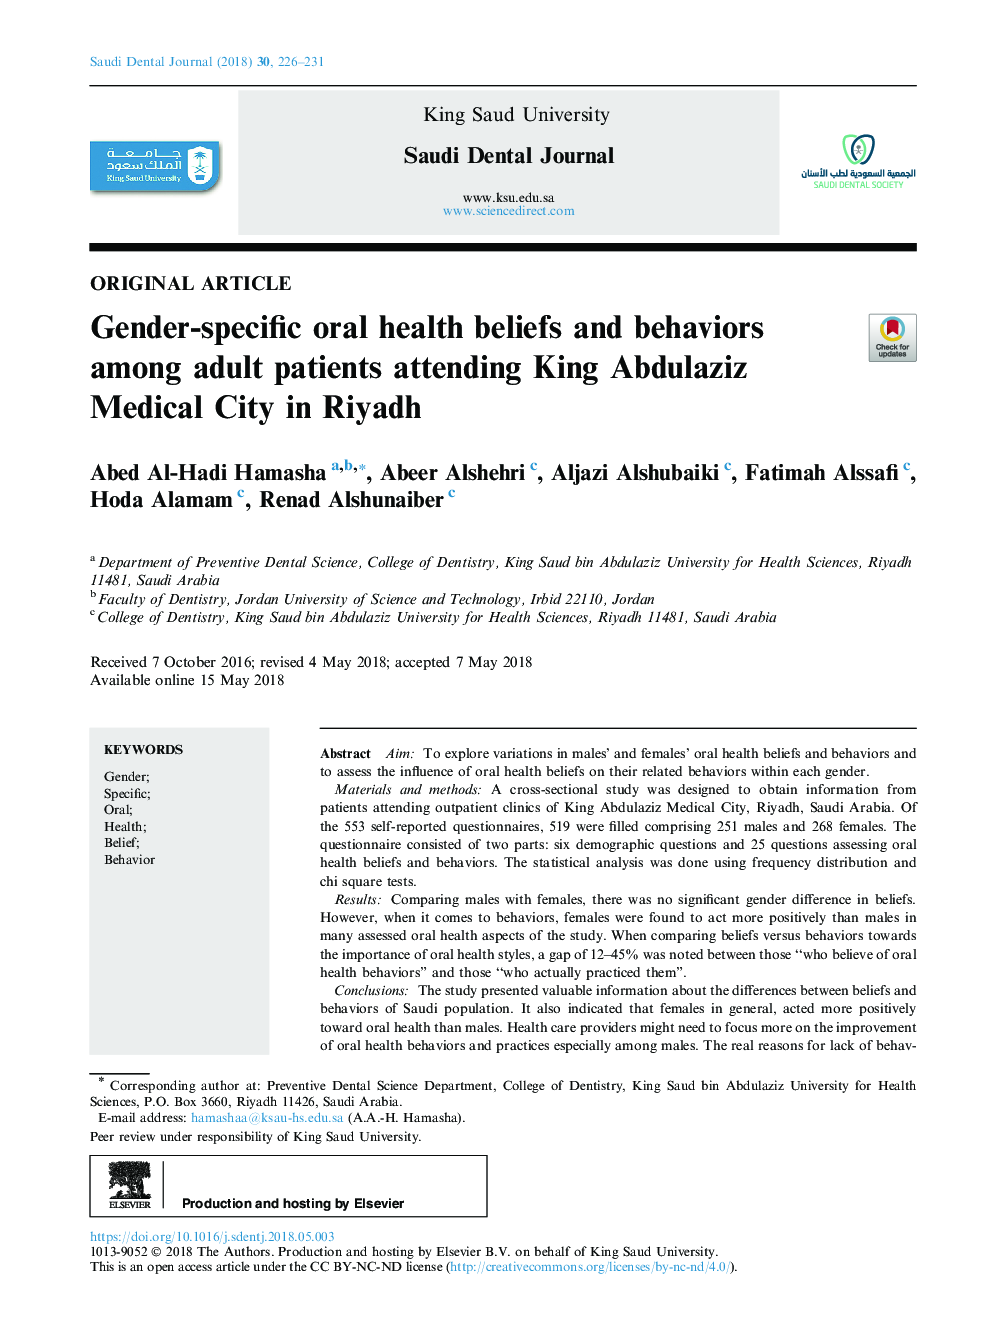 Gender-specific oral health beliefs and behaviors among adult patients attending King Abdulaziz Medical City in Riyadh